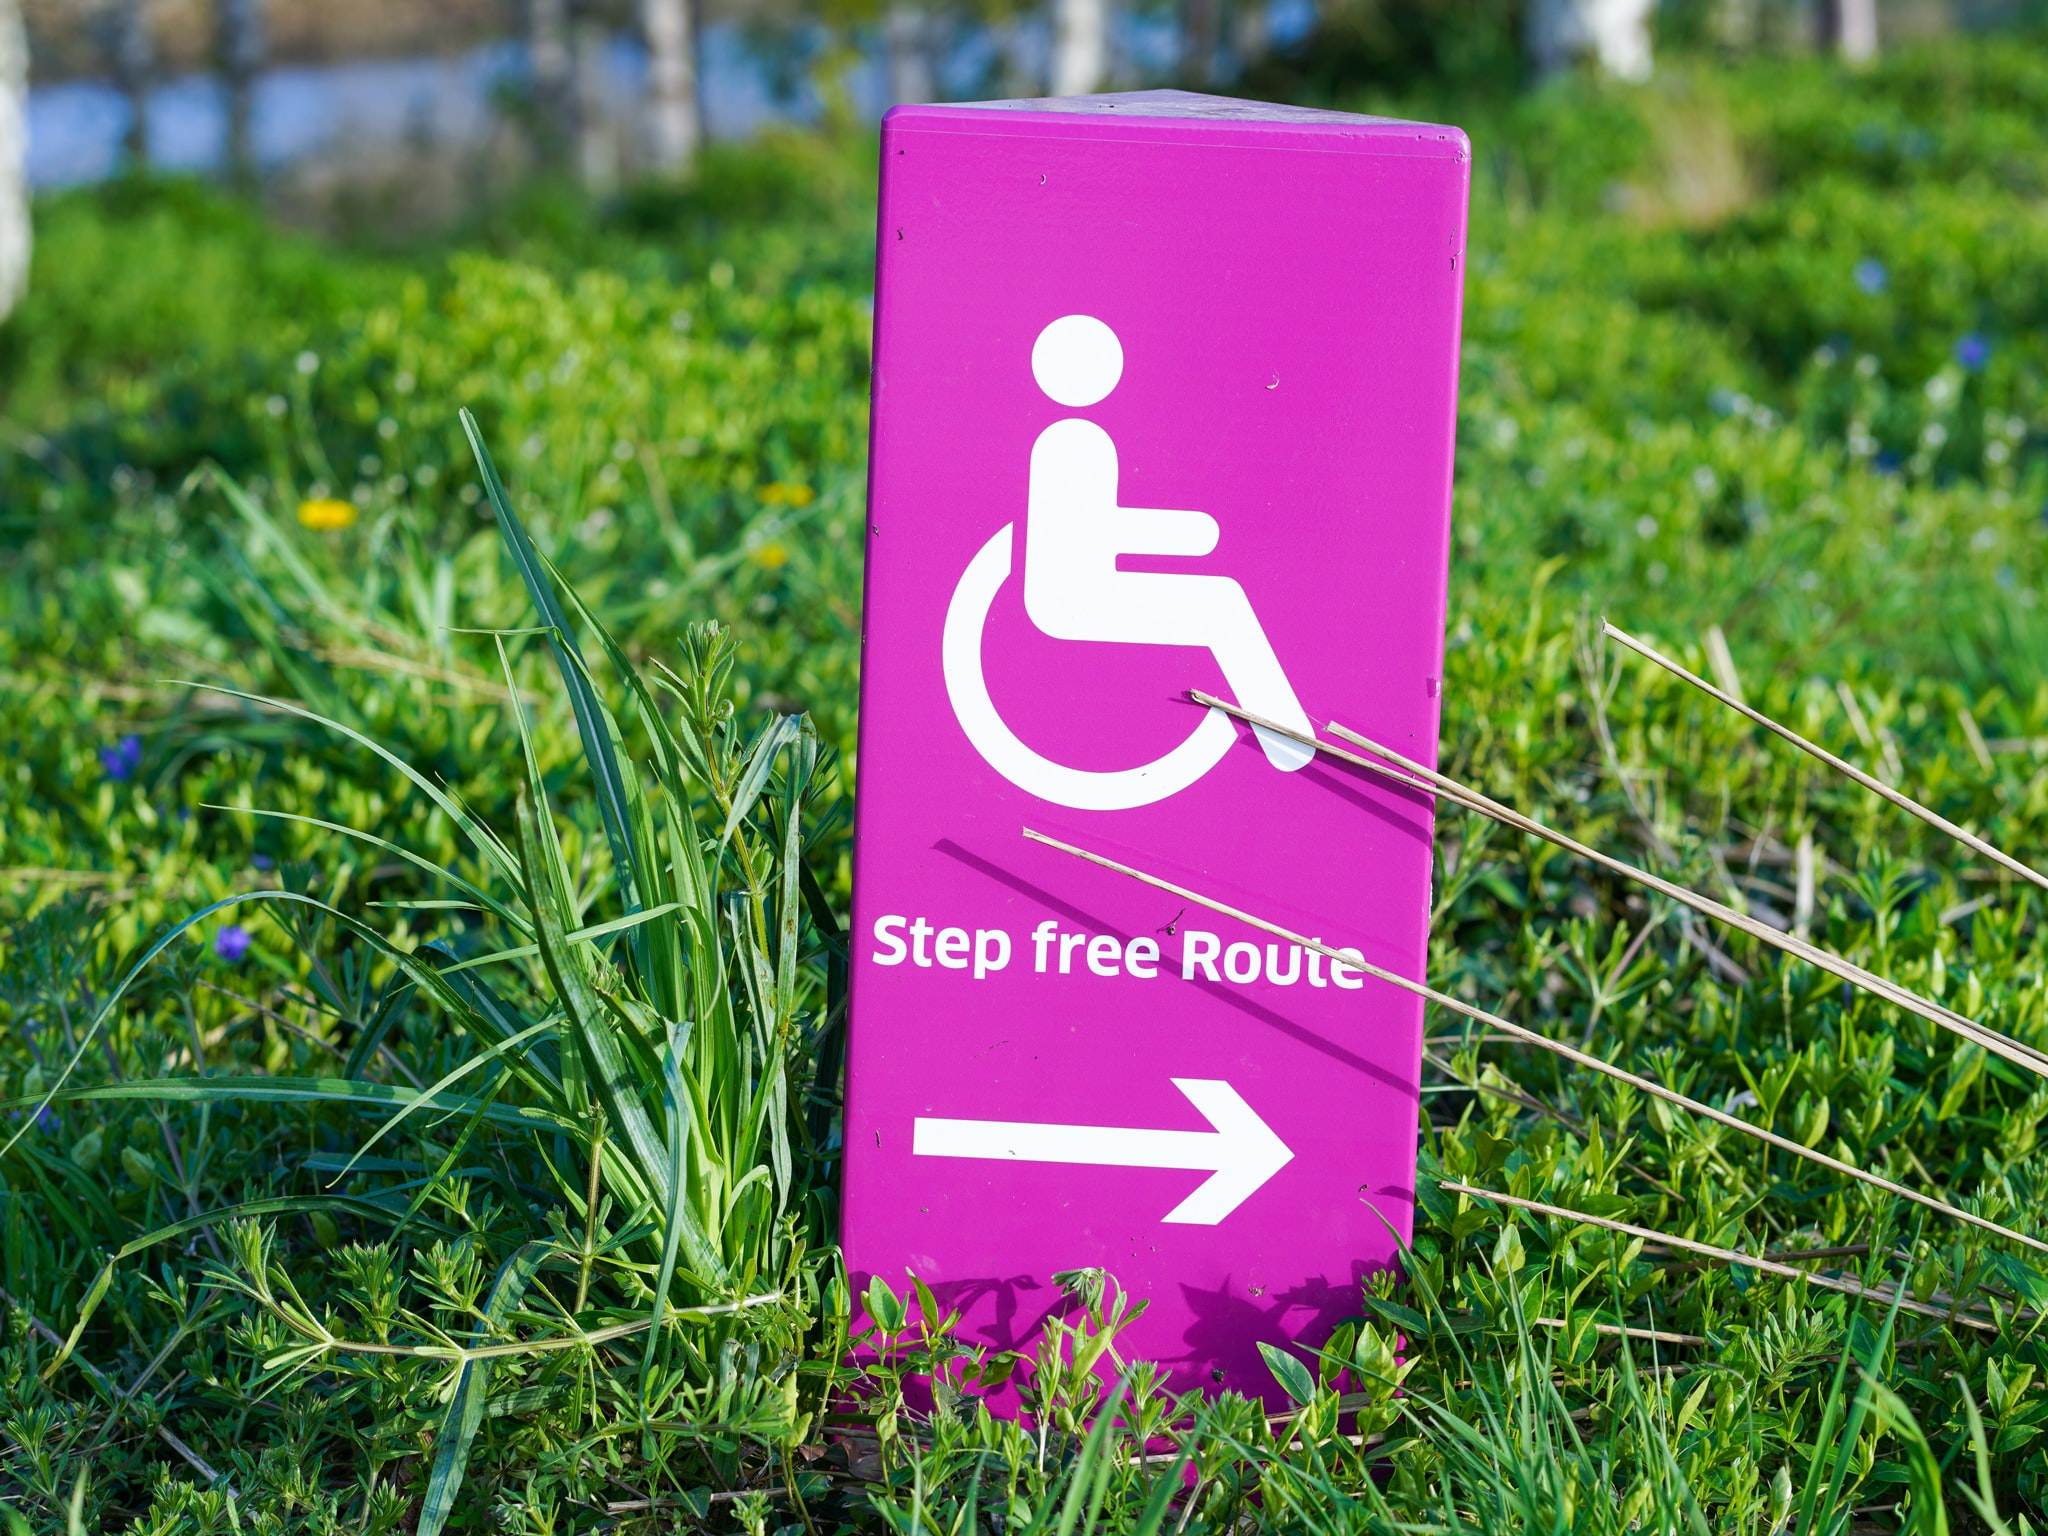 A pink sign with the disability symbol pointing towards a "step free zone" sits on some grass.